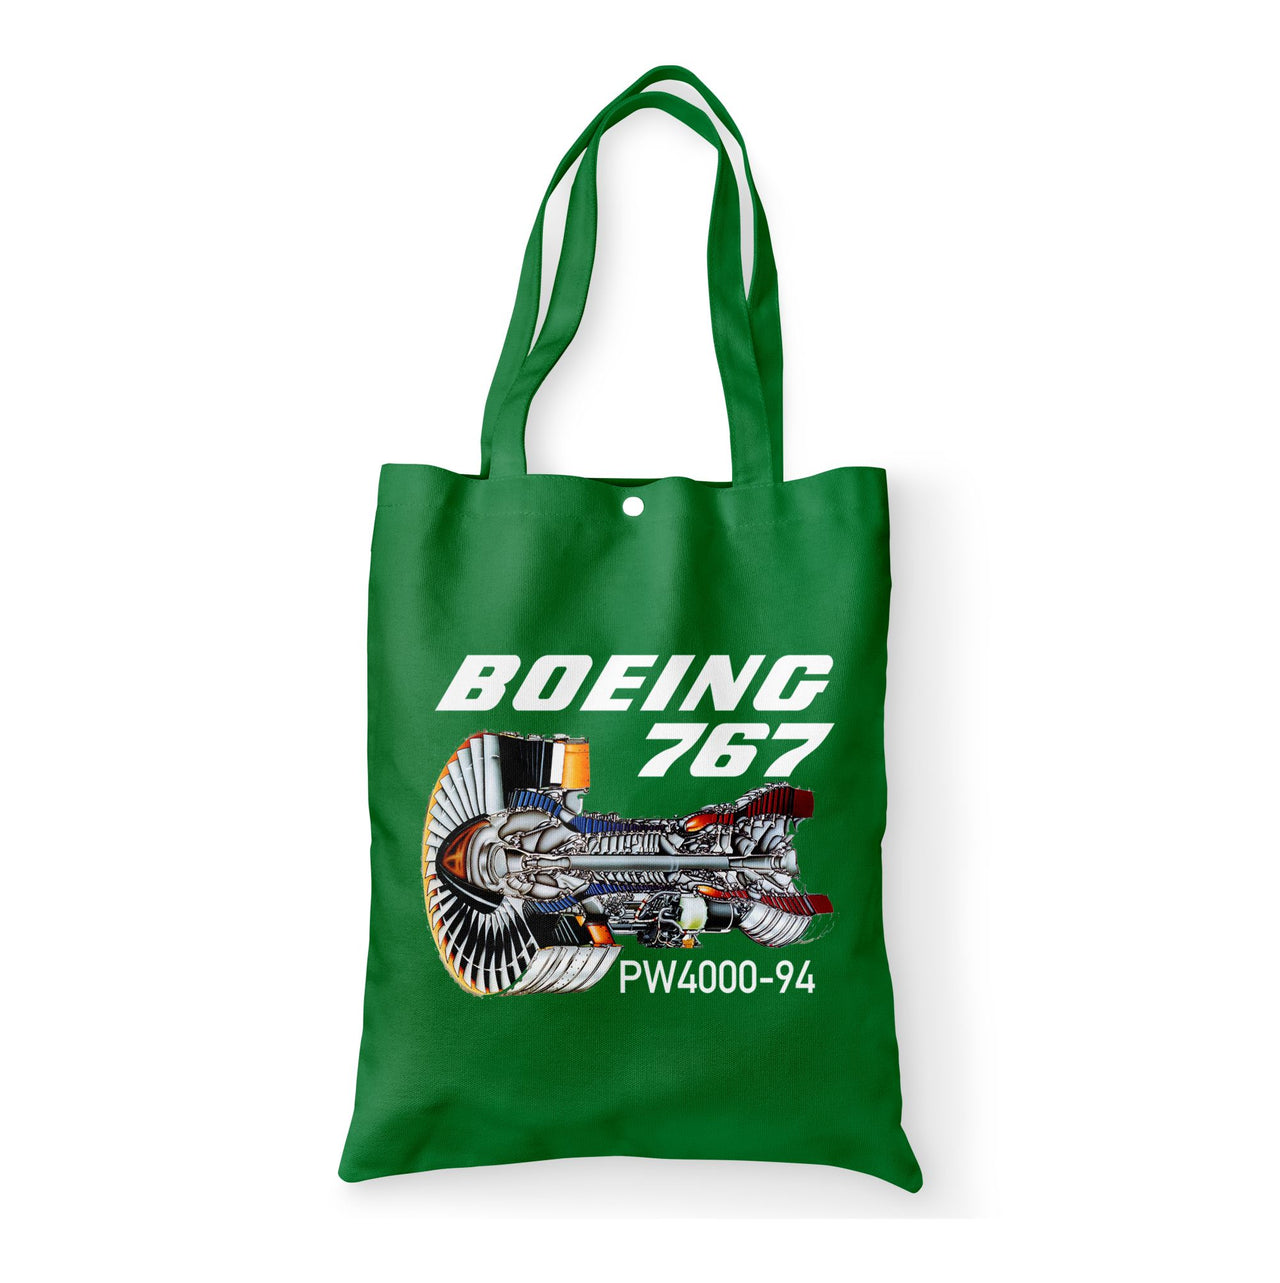 Boeing 767 Engine (PW4000-94) Designed Tote Bags